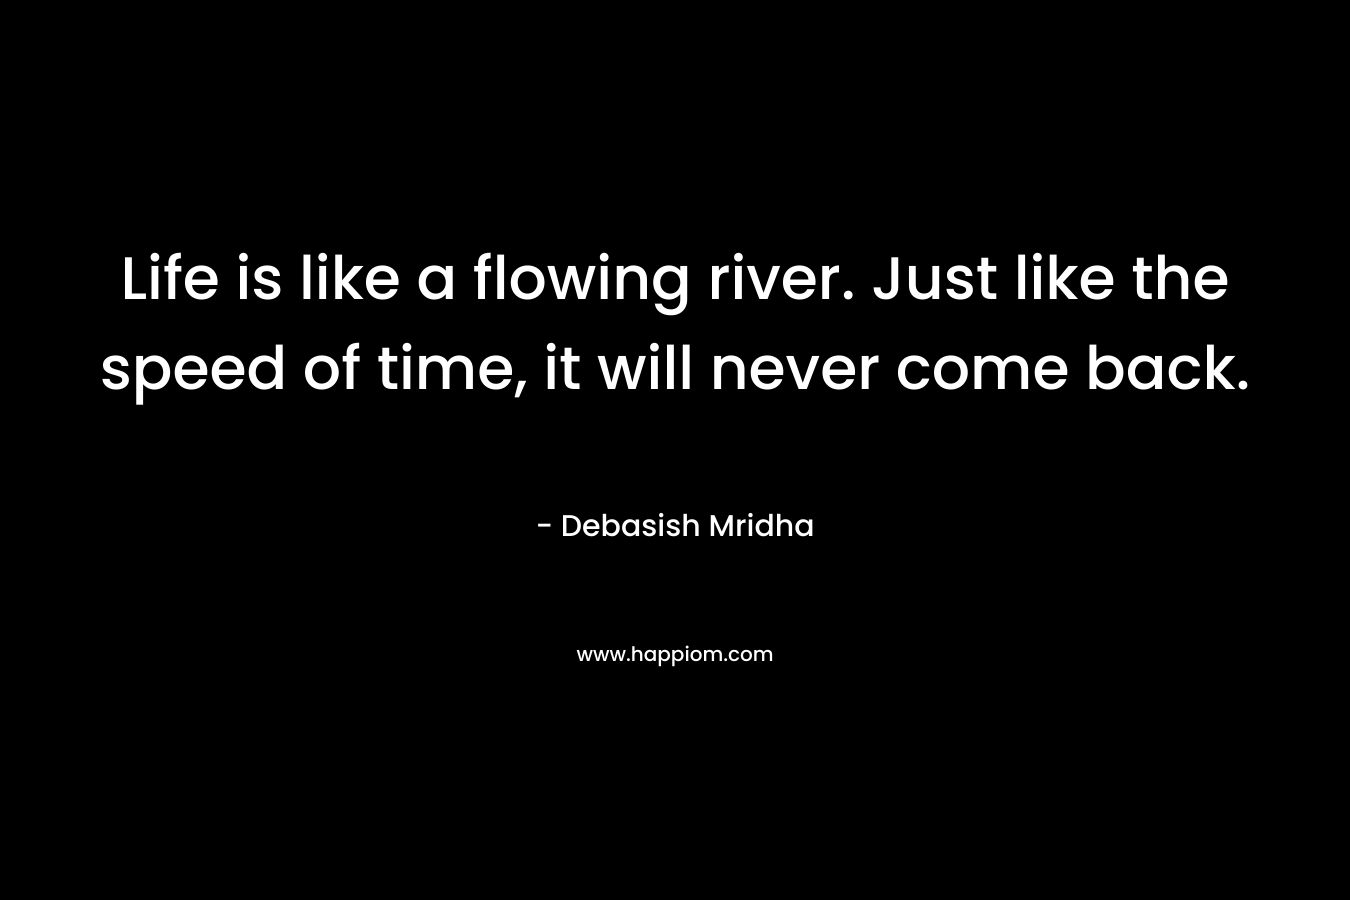 Life is like a flowing river. Just like the speed of time, it will never come back. – Debasish Mridha